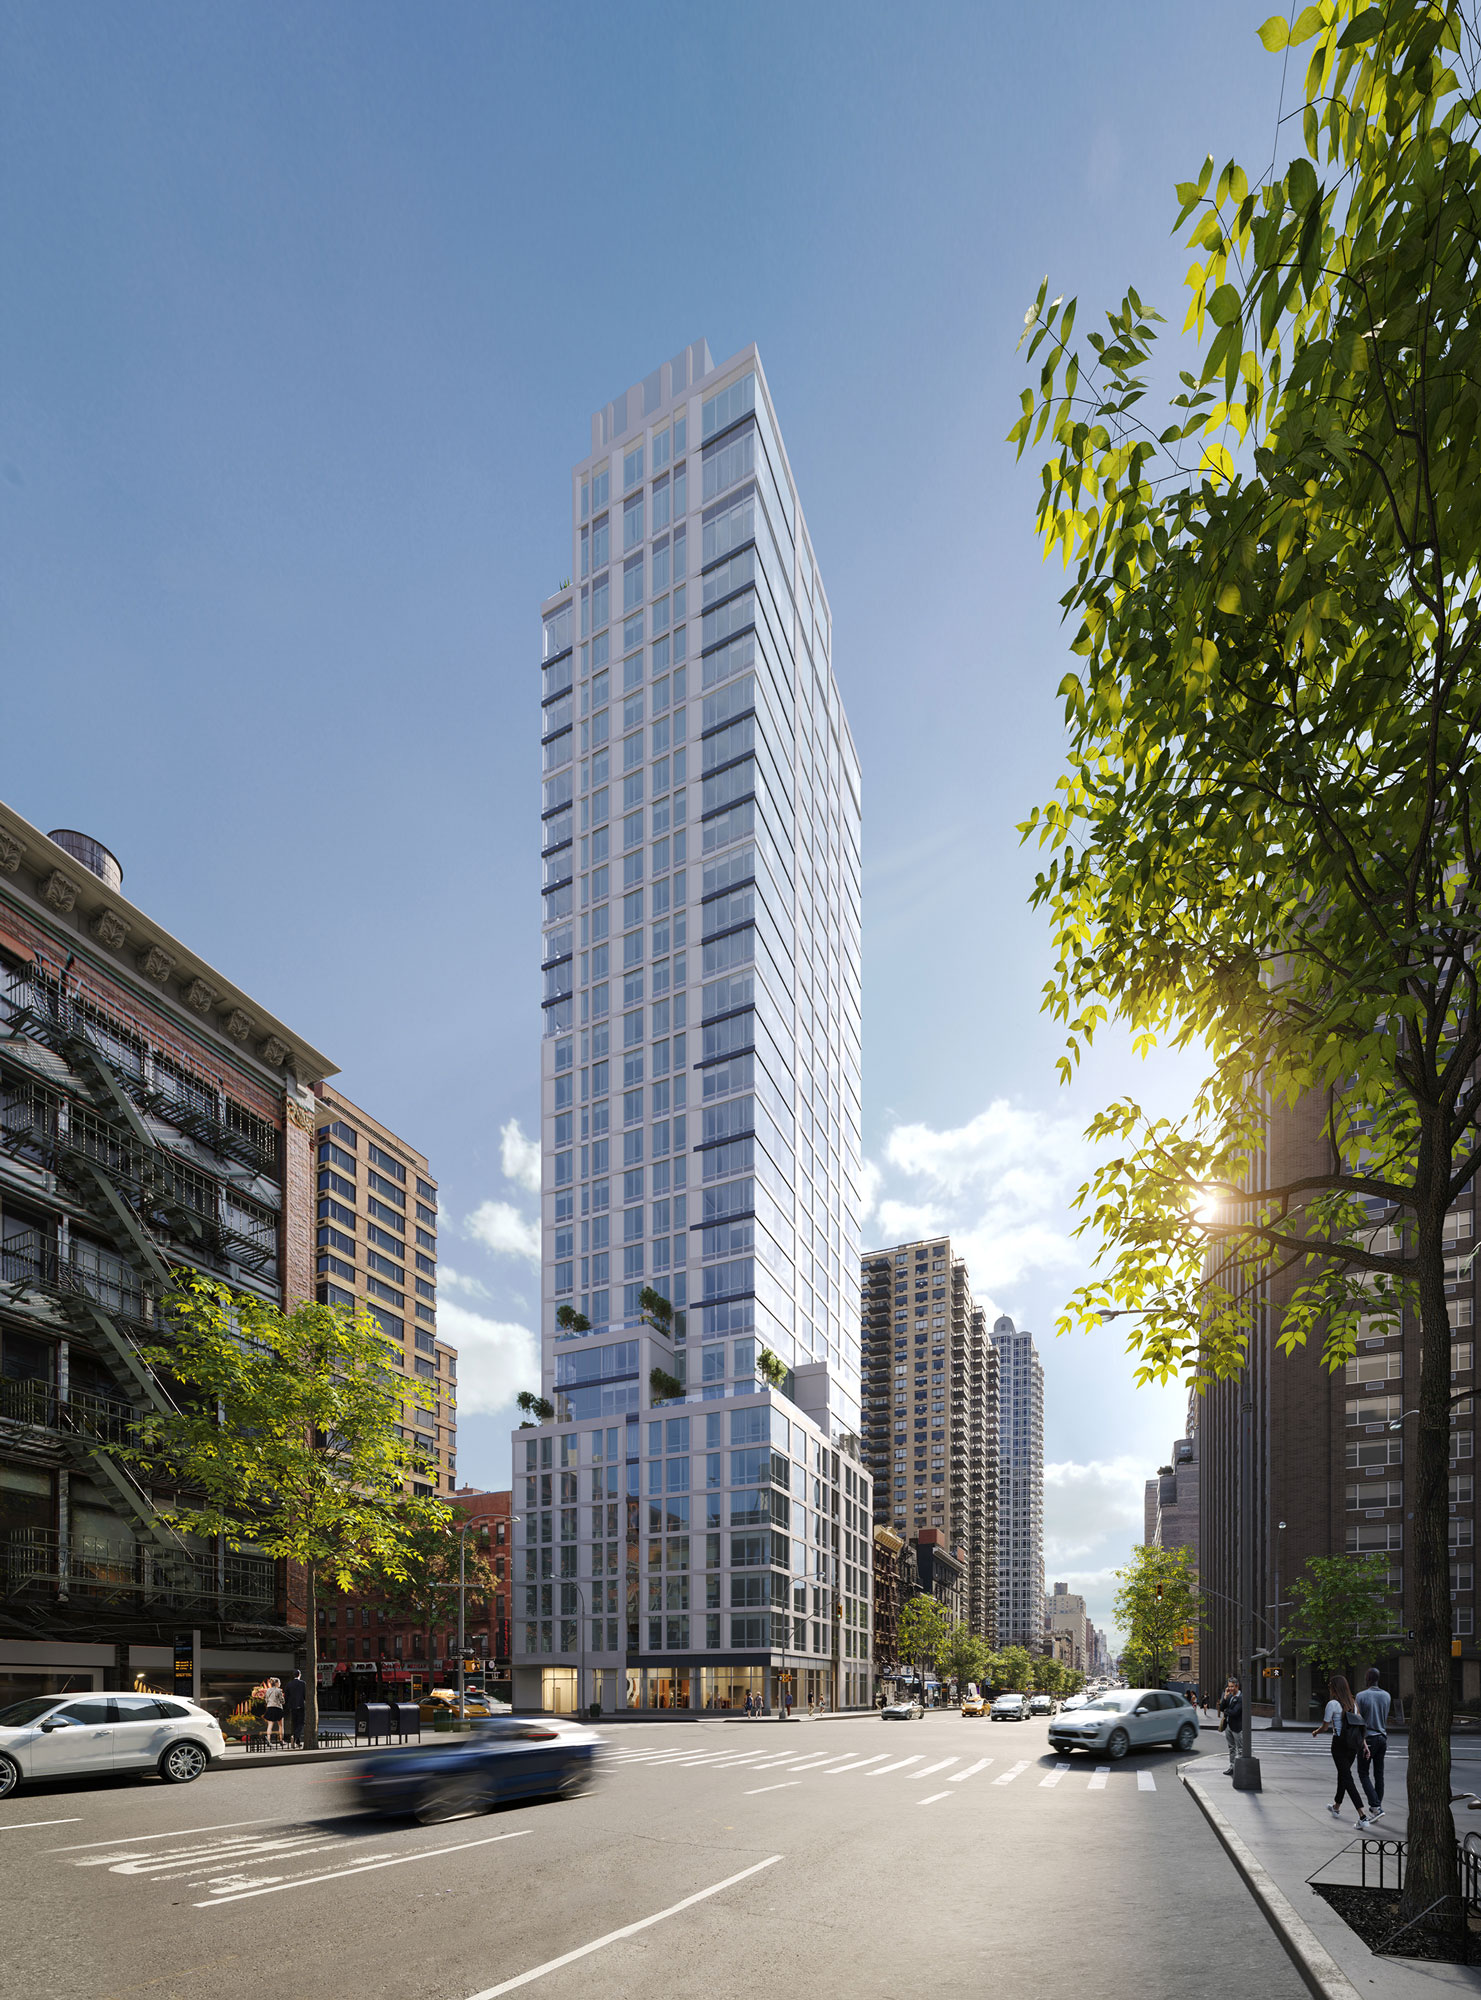 Architectural Rendering of the exterior of the Eastlight building project located on the Kips Bay neighborhood in New York City